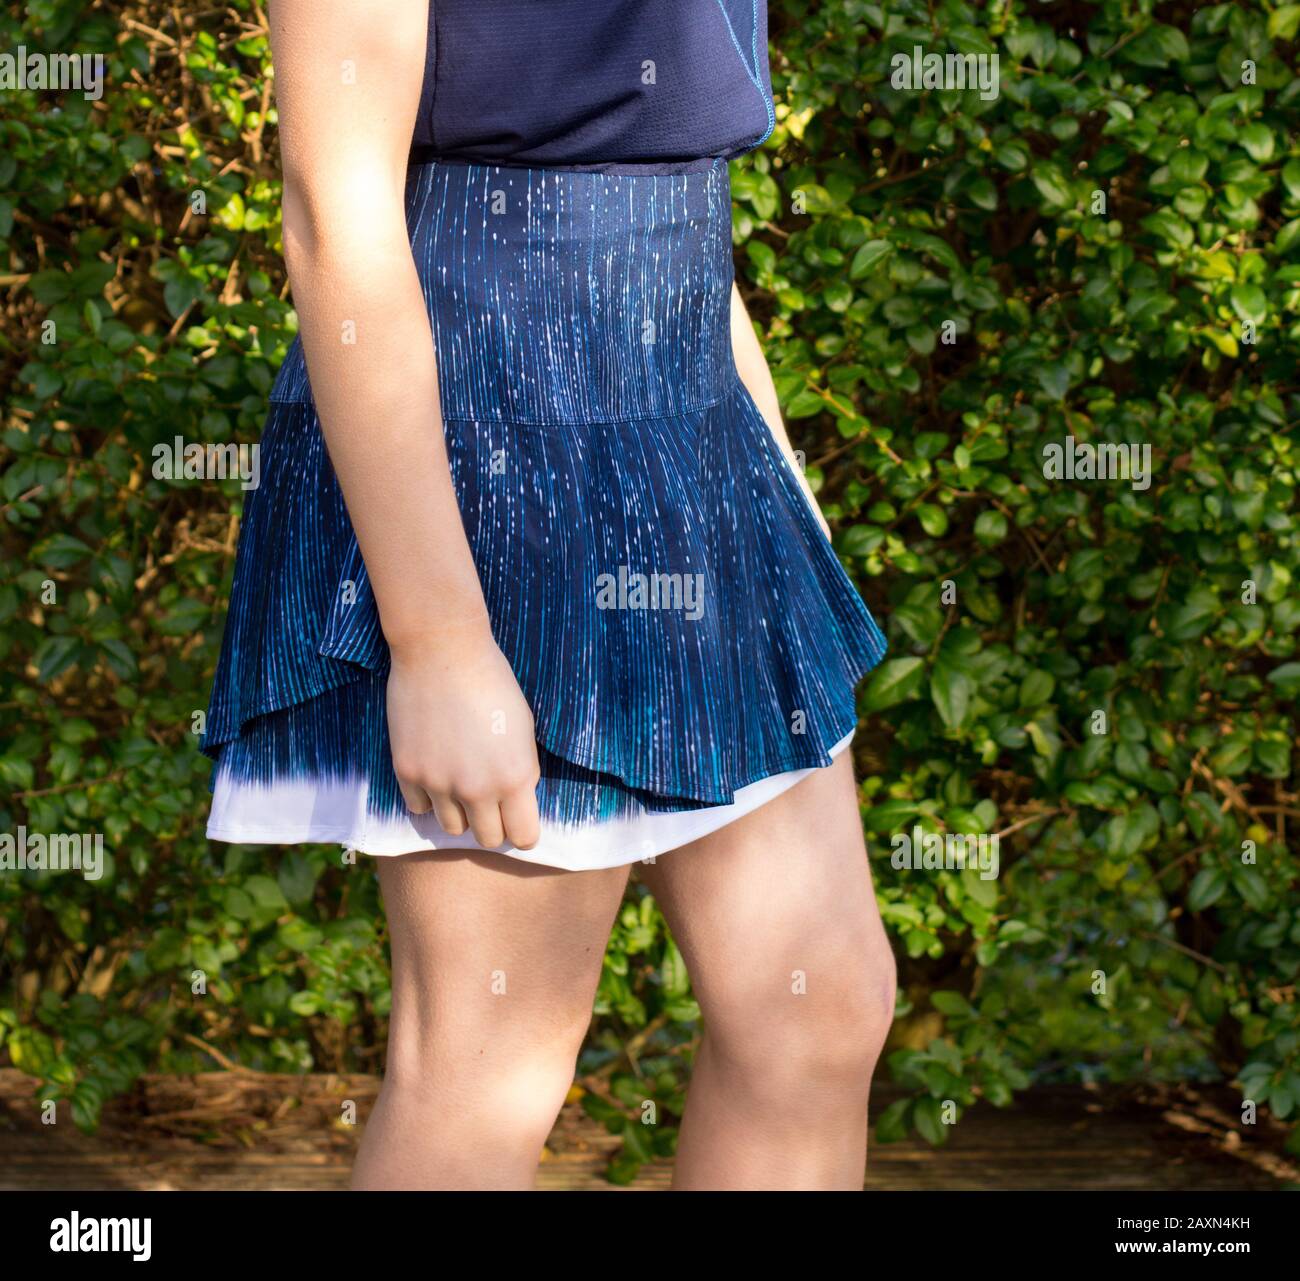 Tennis Clothes, Sport, sportsperson concept, skirt, blue tennis skirt, ladies tennis outfit, playing, play, tournament, concept, fitness, womens, fit, Stock Photo